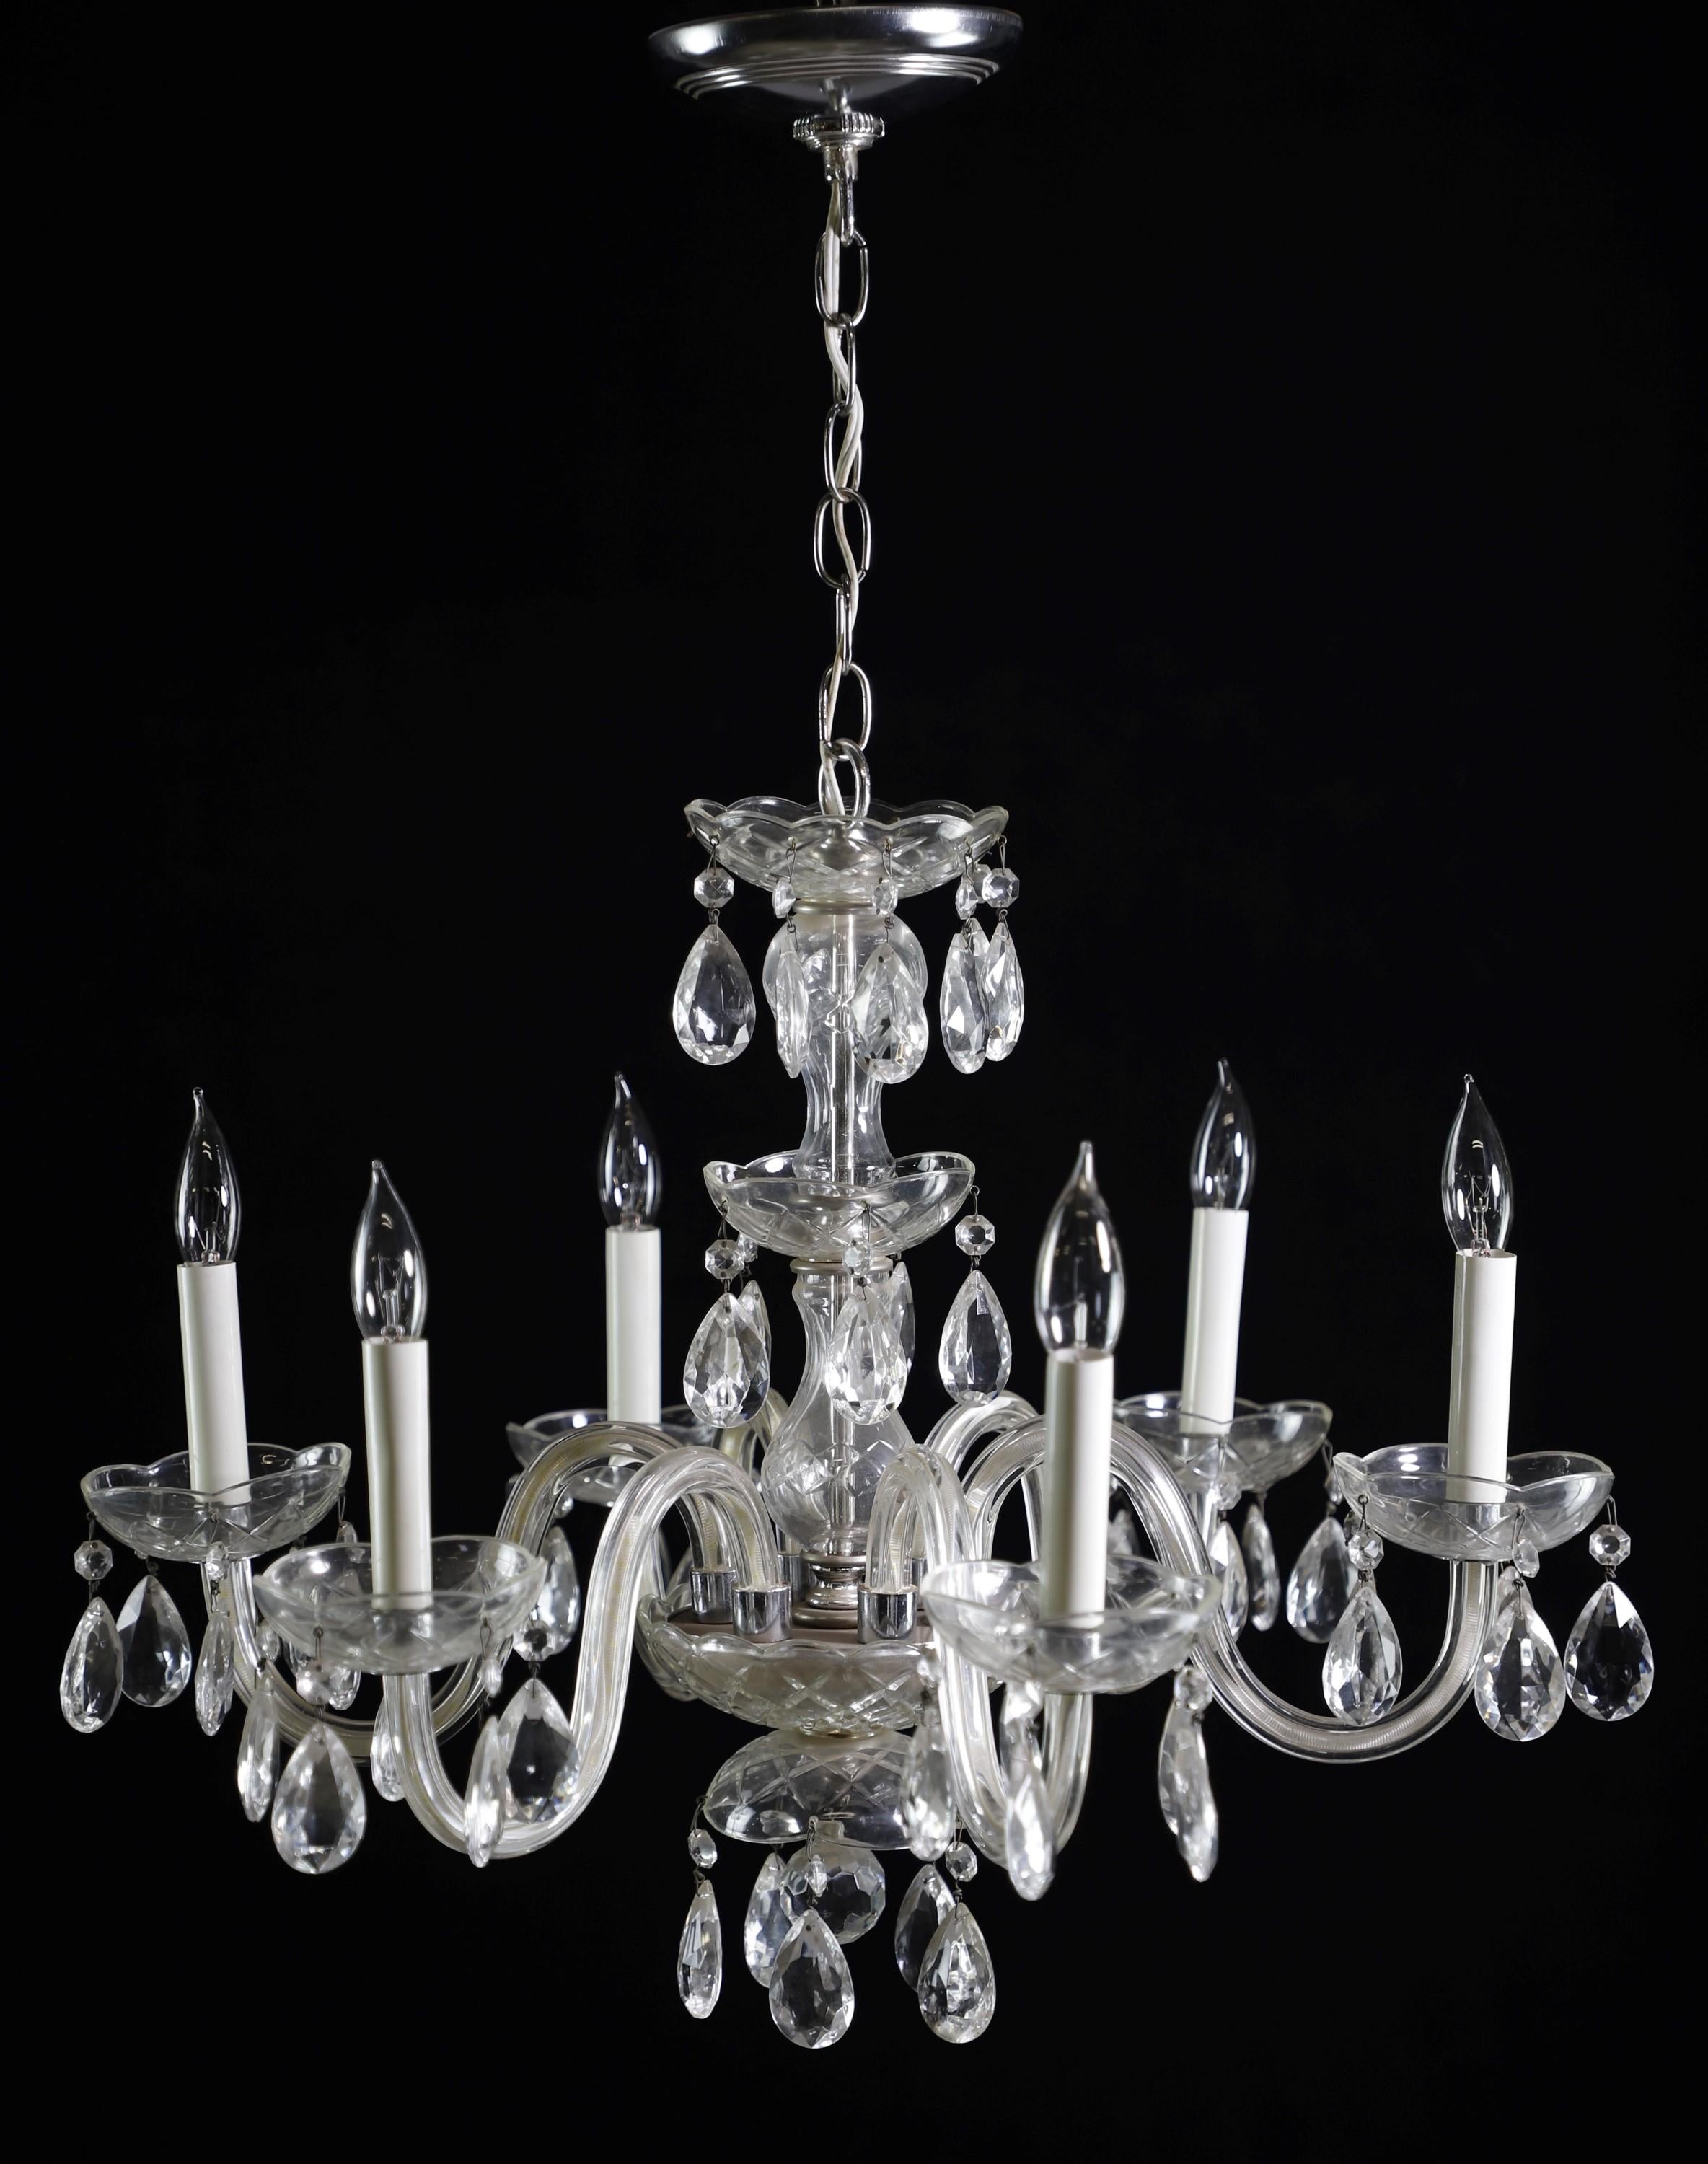 Six arm etched crystal chandelier. Cleaned and restored. Takes six candelabra light bulbs. The price includes restoration of cleaning, rewiring, and crystal replacement. Please note, this item is located in our Scranton, PA location.